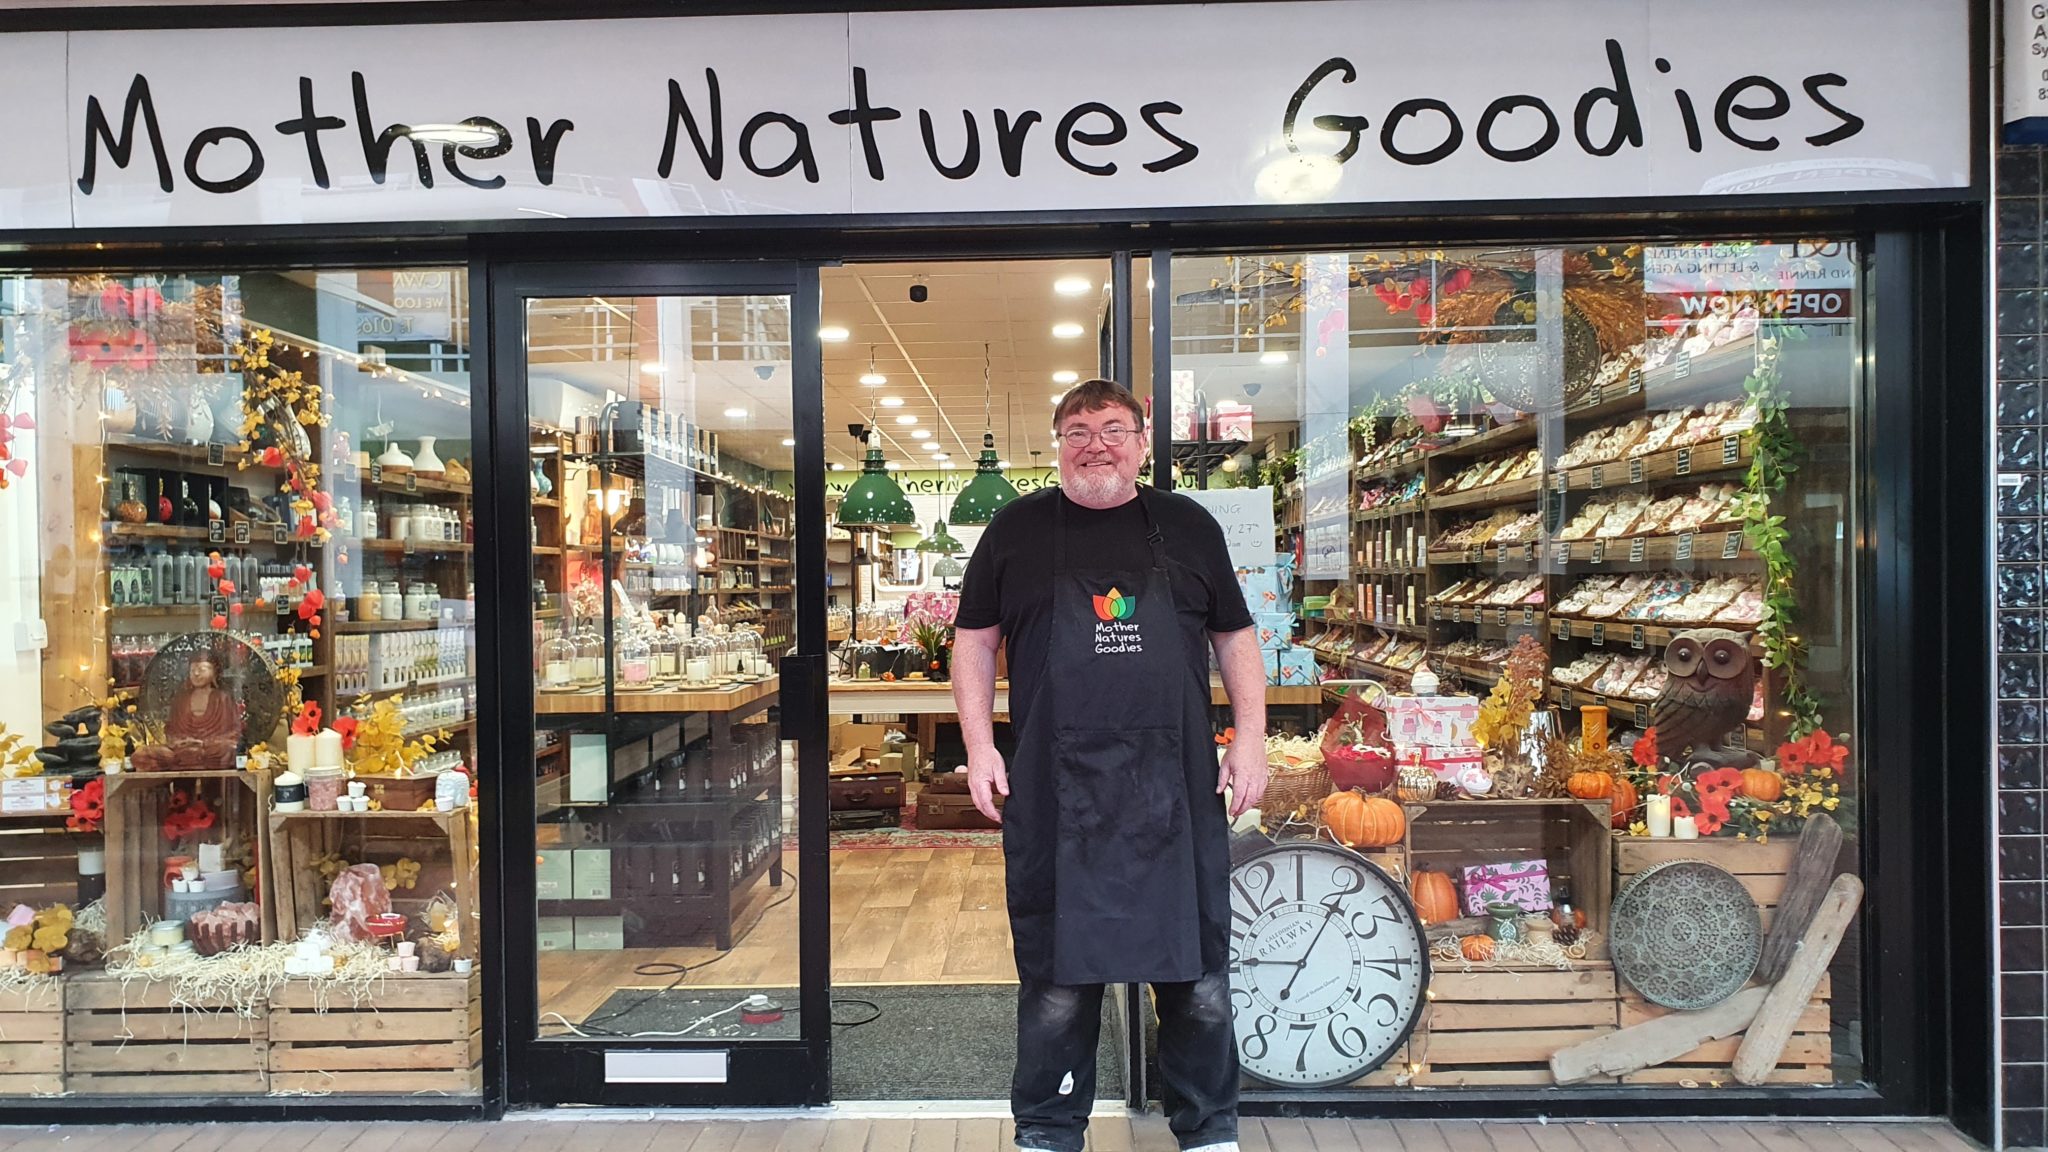 Steve stood outside Mother Nature’s Goodies